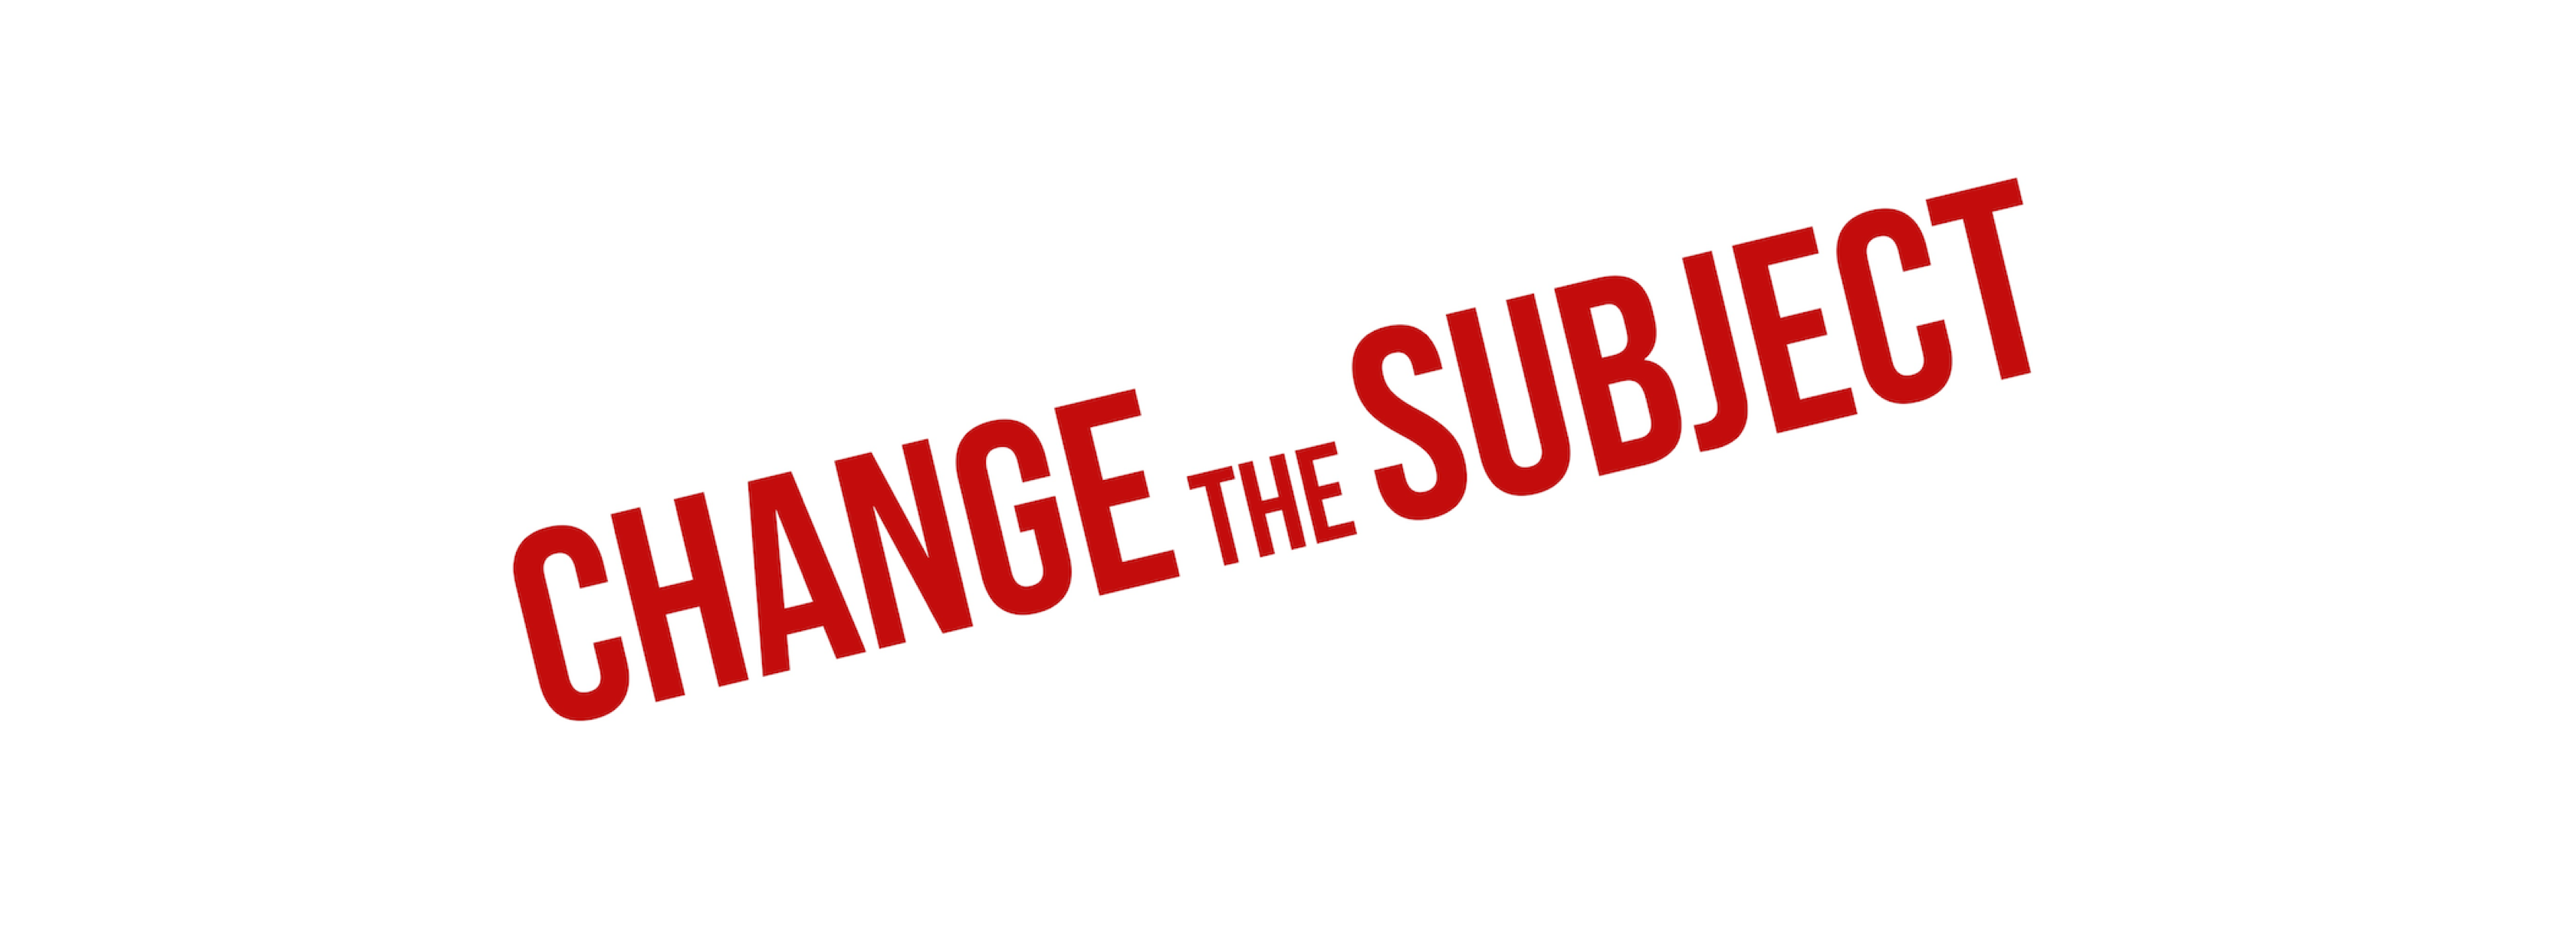 Change the Subject film title banner